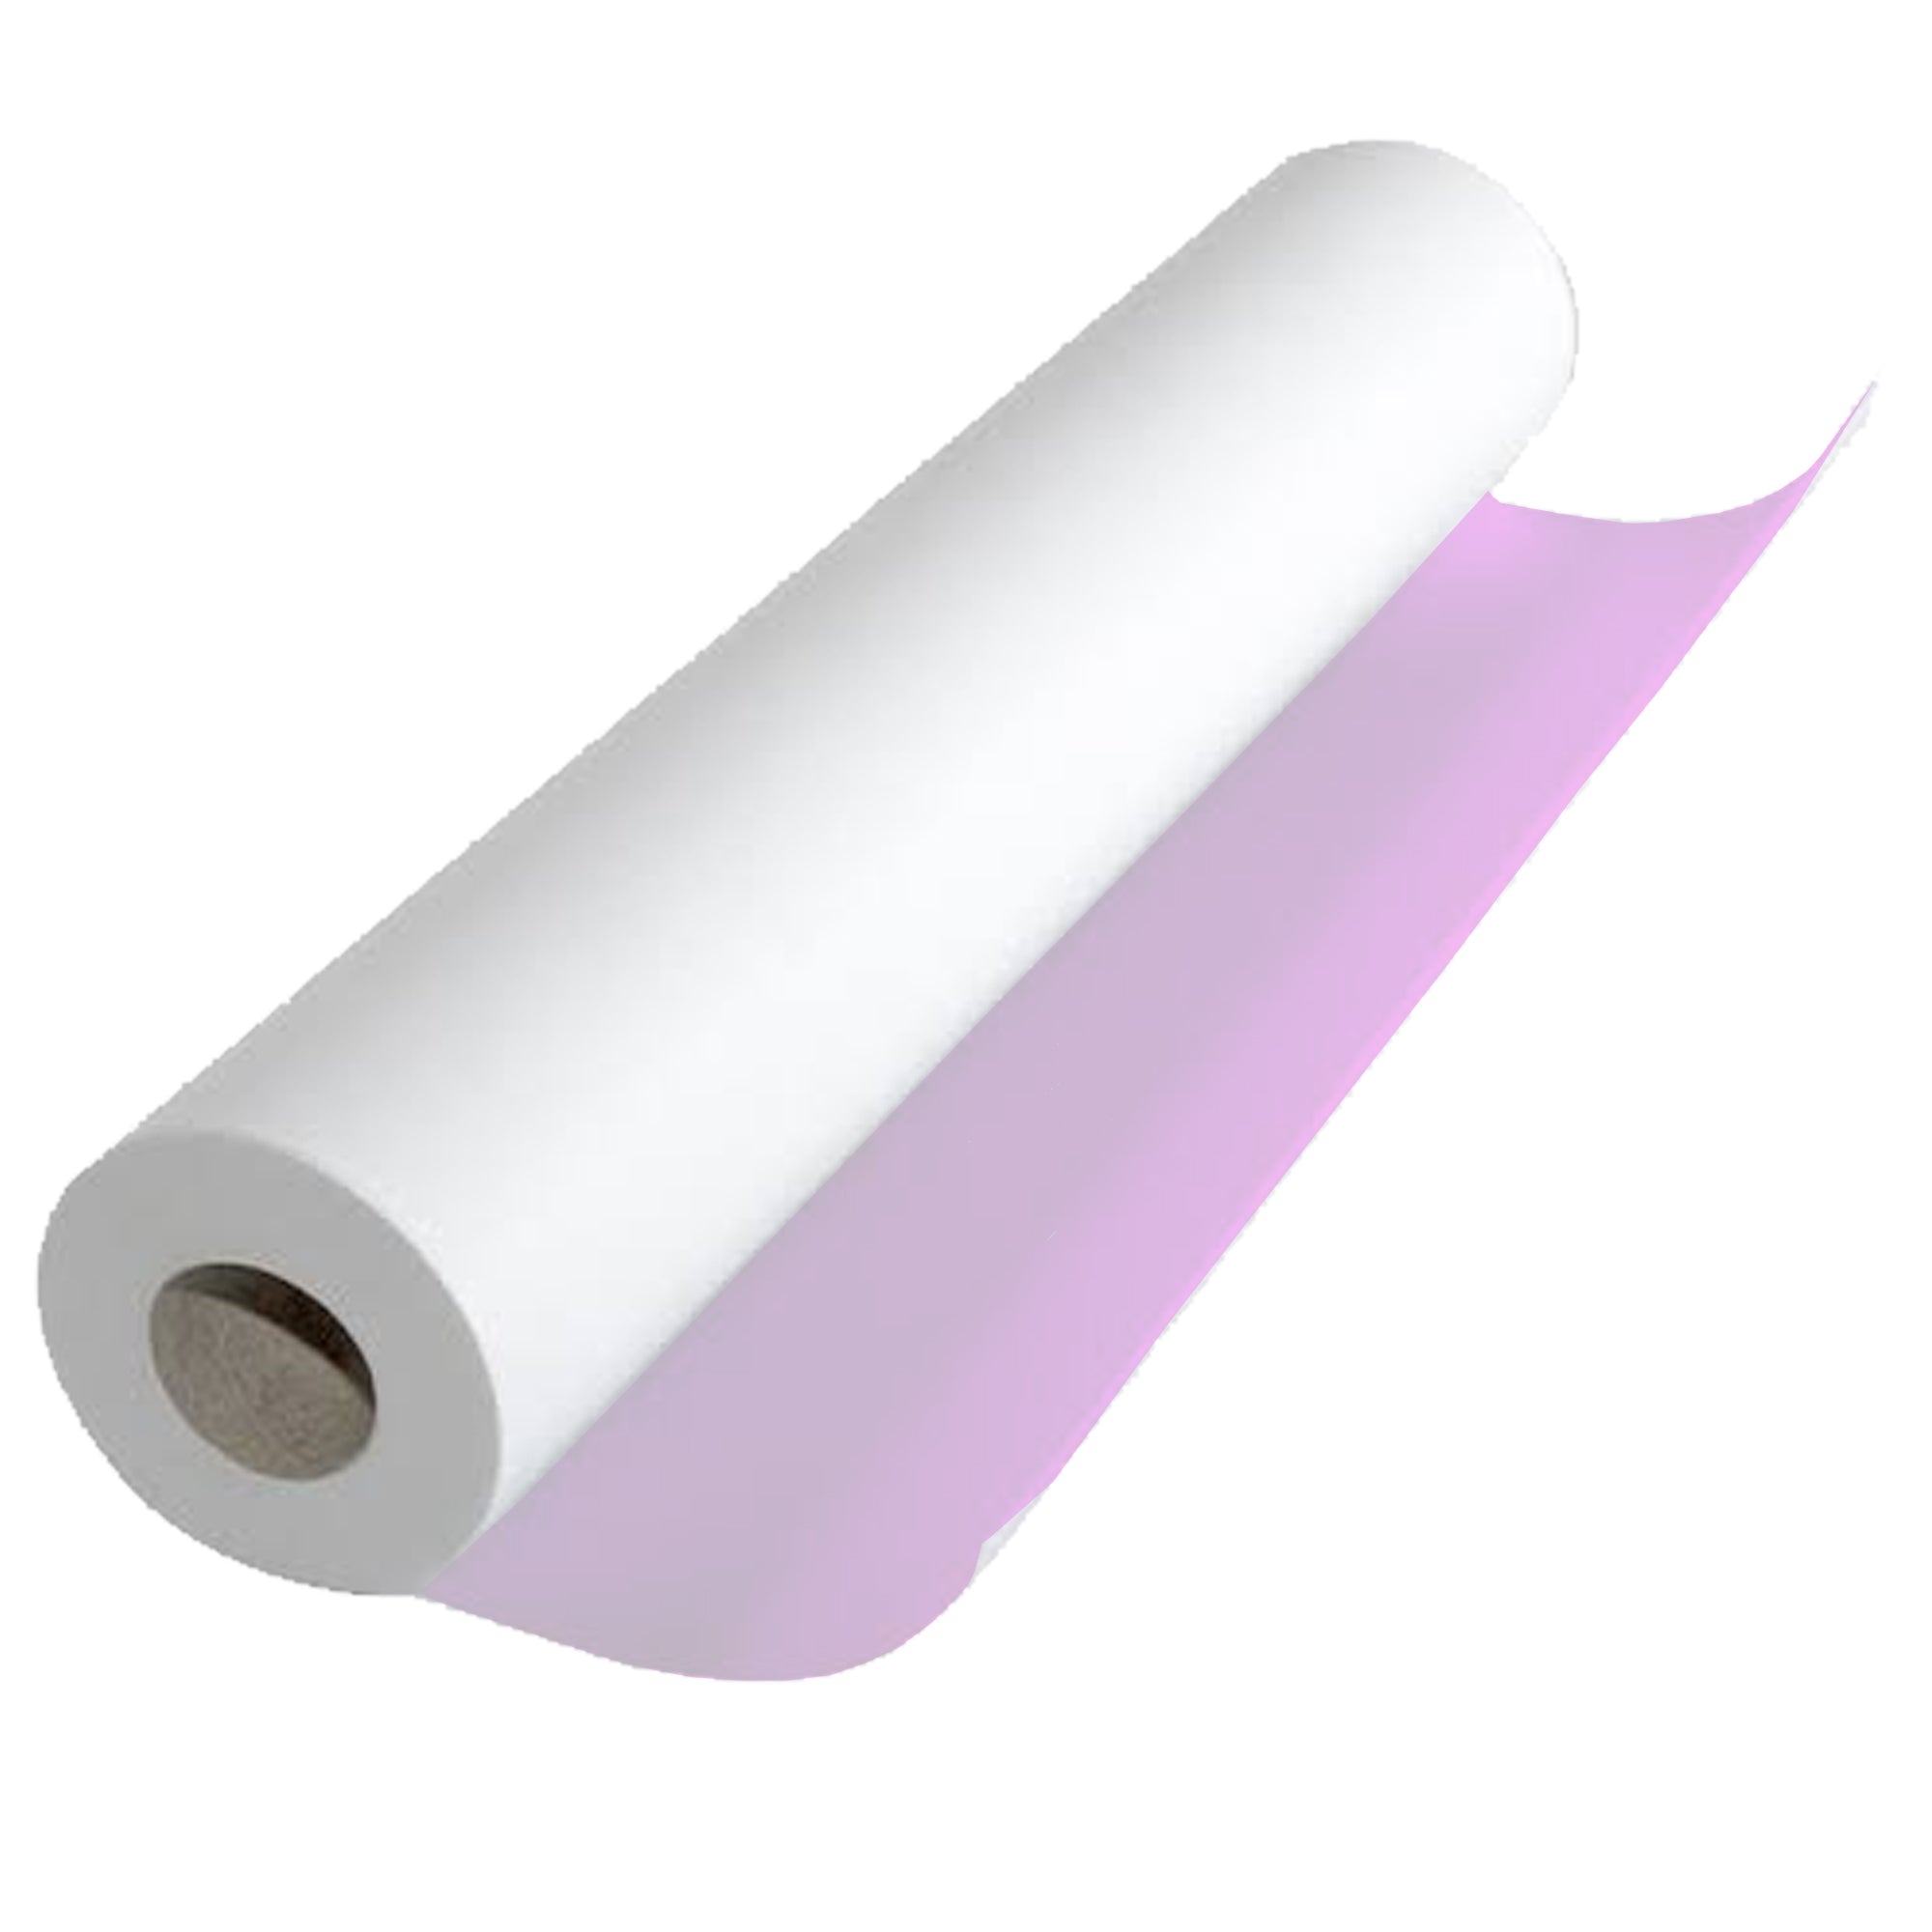 InkOwl Sublimation Paper Roll 24 Inches x 328 Feet, 1 Roll, 3 Core, 105gsm